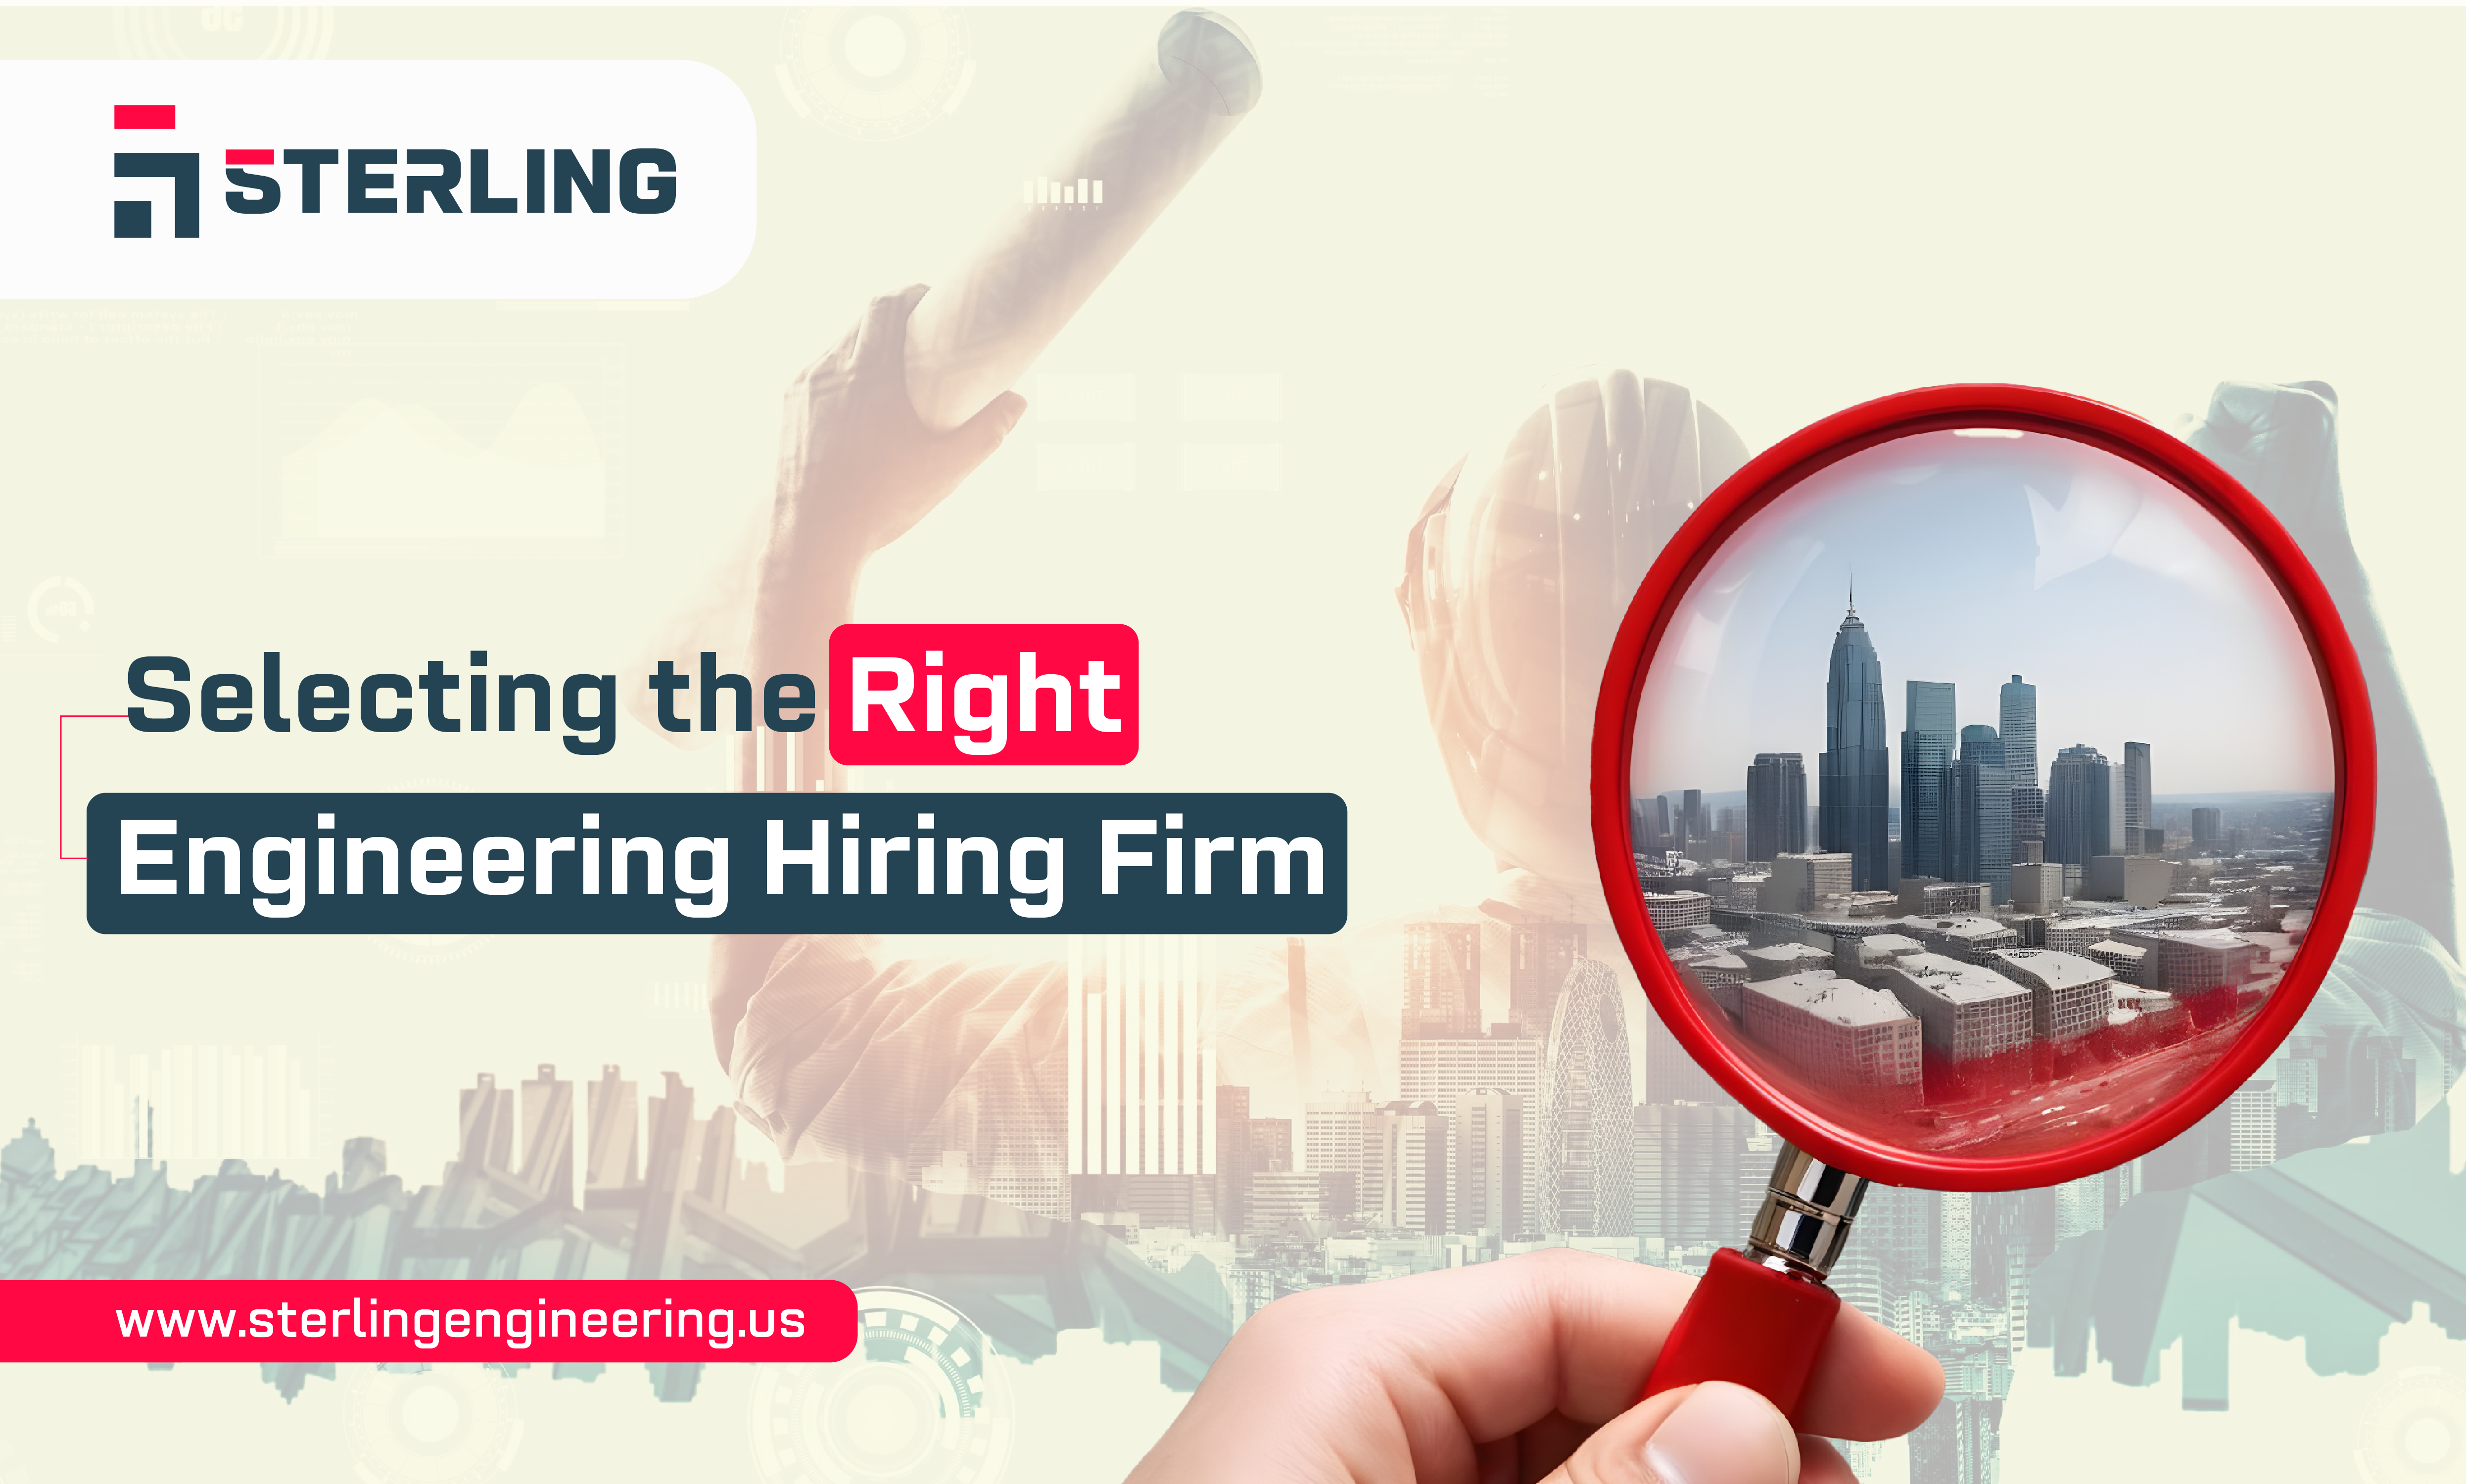 Top 5 Factors for Selecting the Right Engineering Hiring Firm